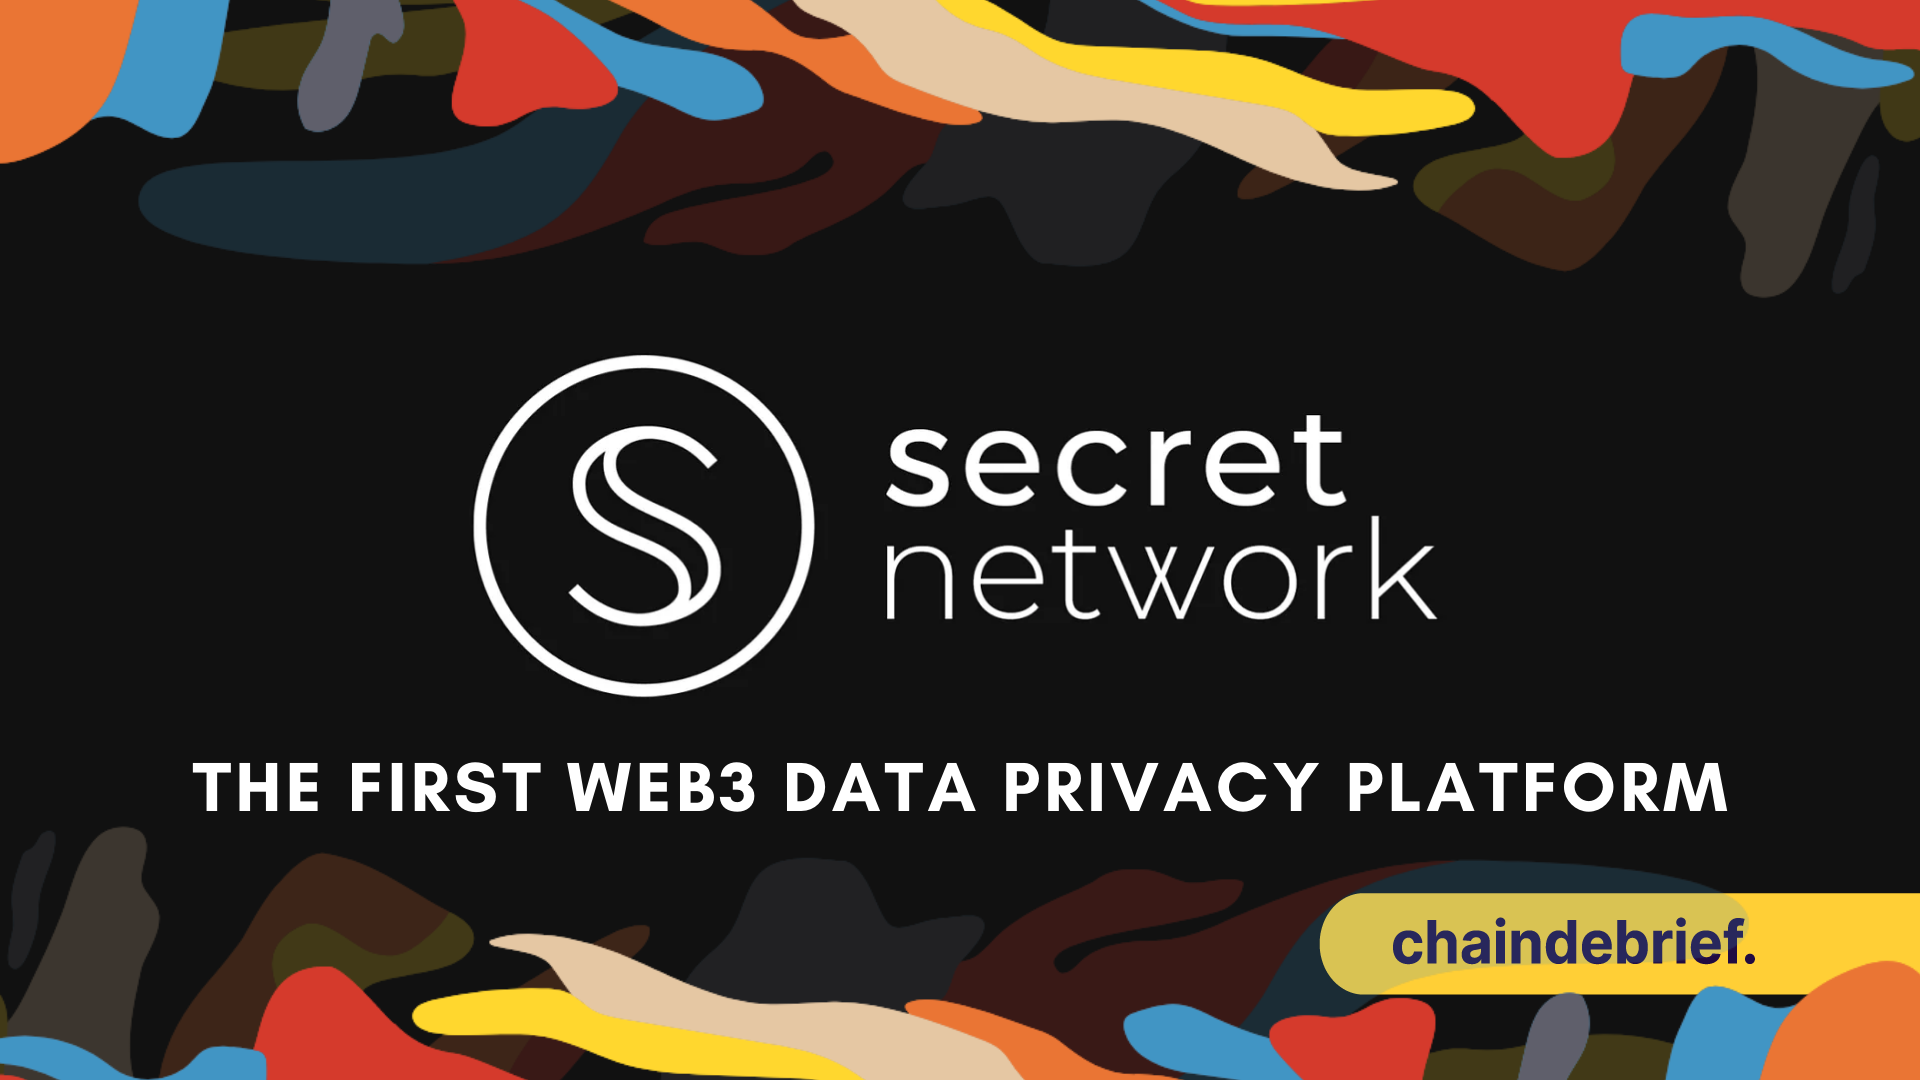 All You Need To Know About Secret Network – The First Data Privacy Platform On Web 3.0